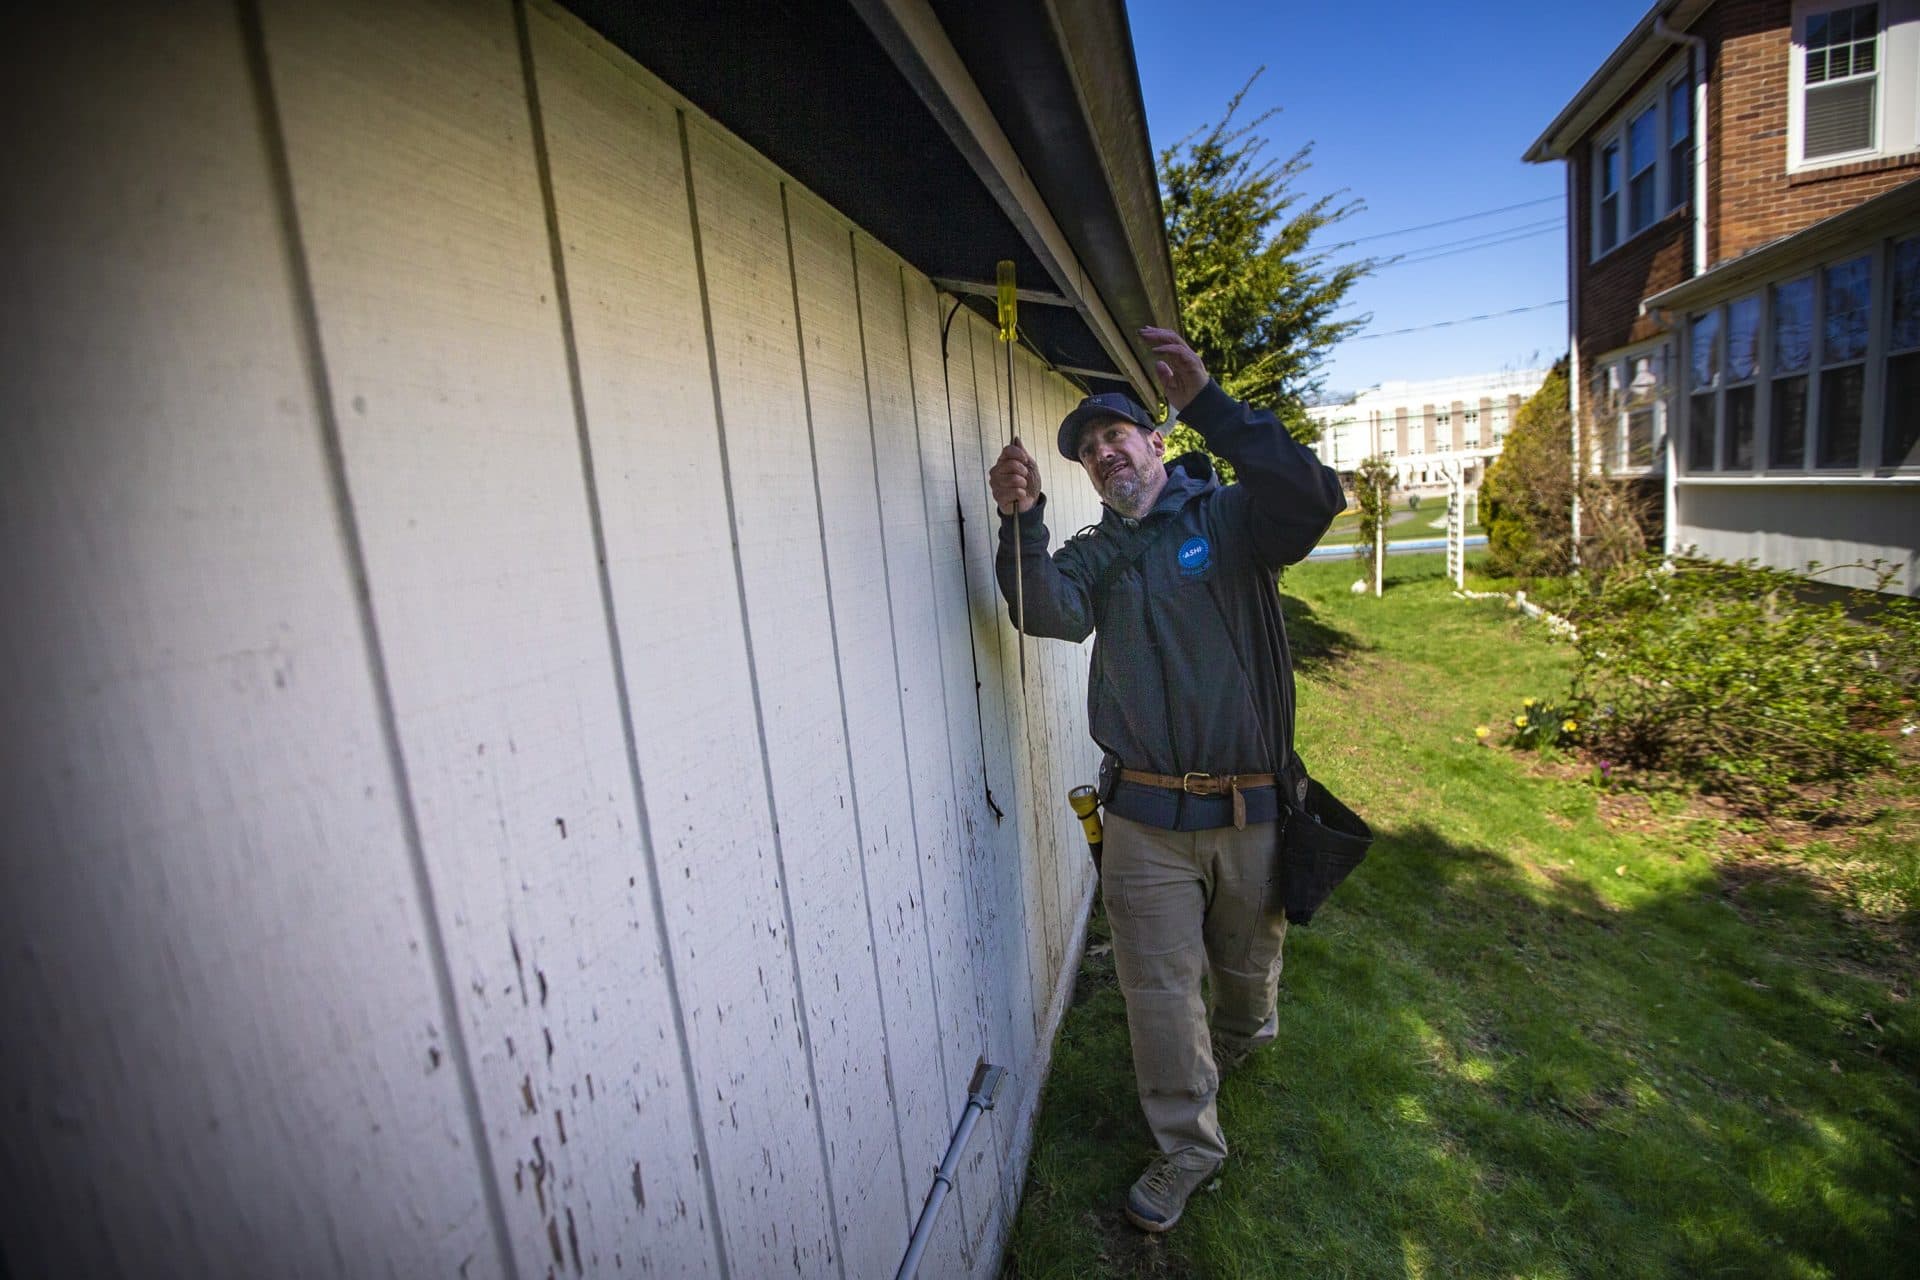 Alex Steinberg, of JBS Home Inspections, probes the underside of the gutters during a house inspection in Newton. (Jesse Costa/WBUR)